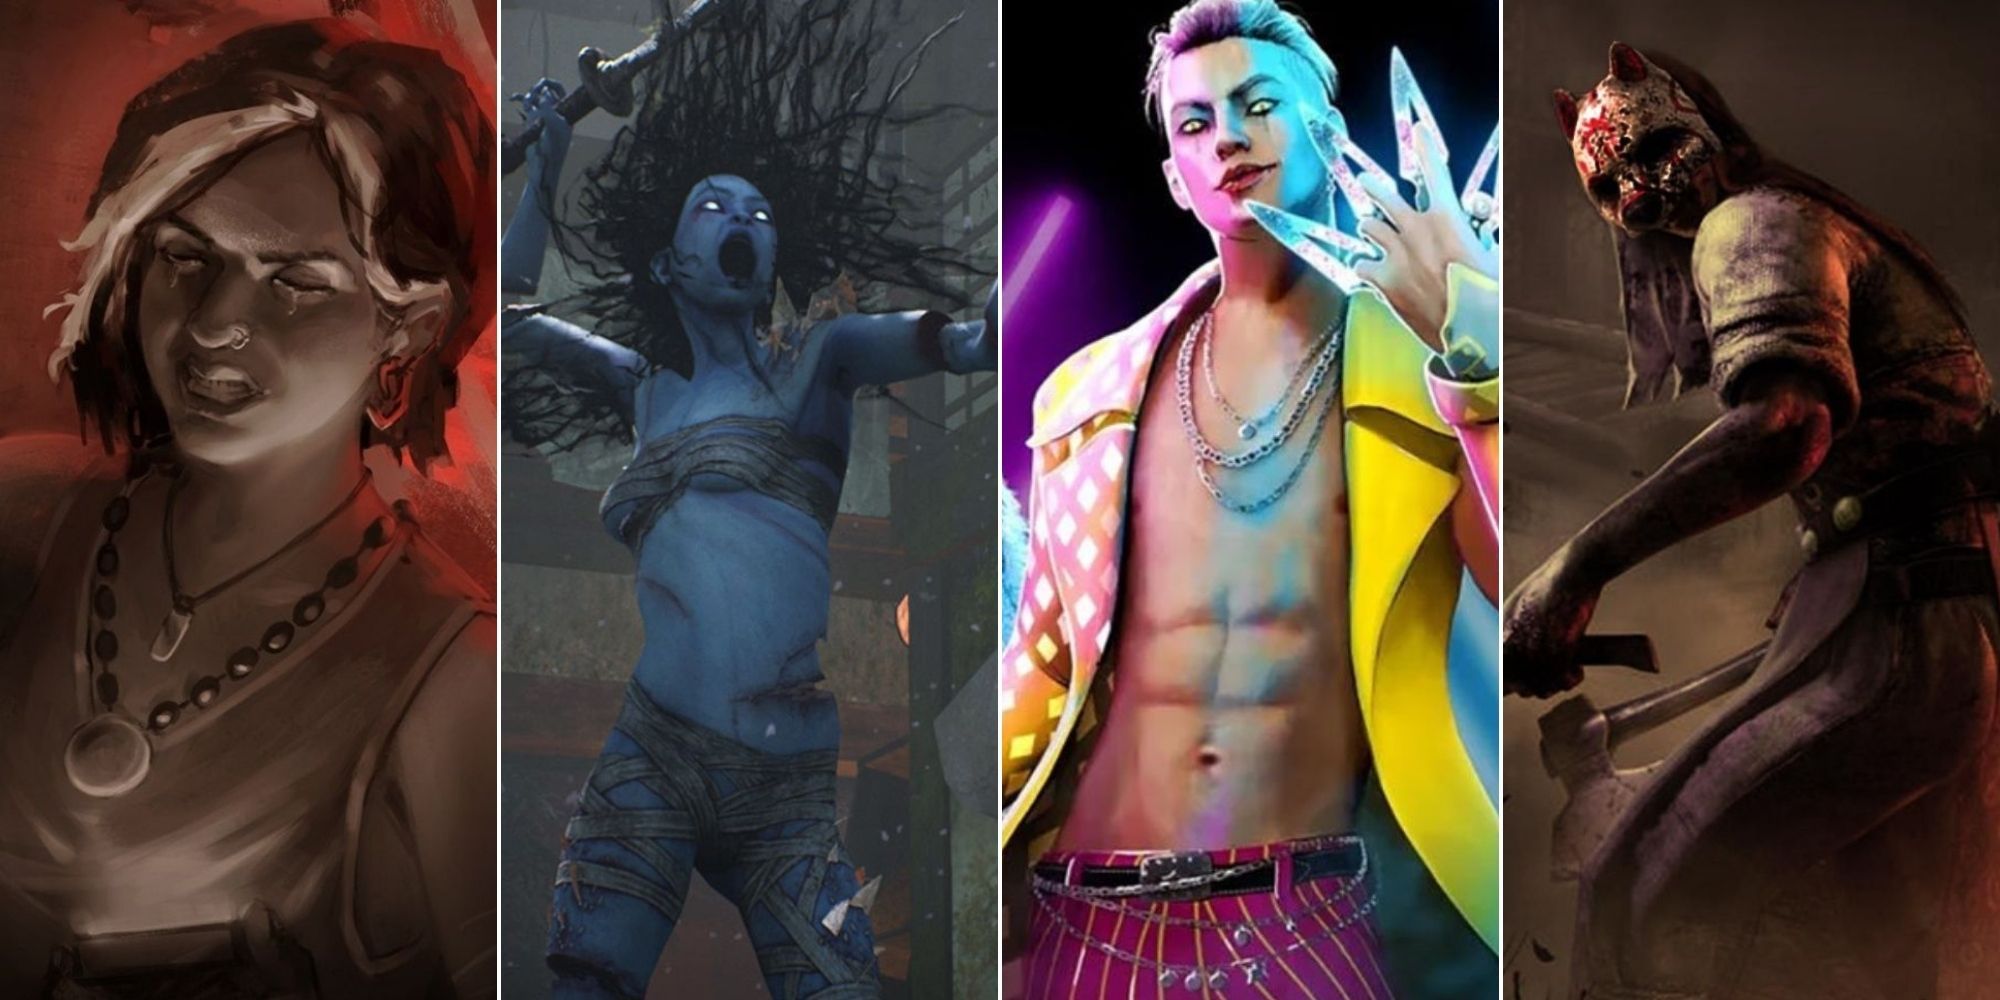 Dead By Daylight split image. Haddie, The Spirit, The Trickster, The Huntress.